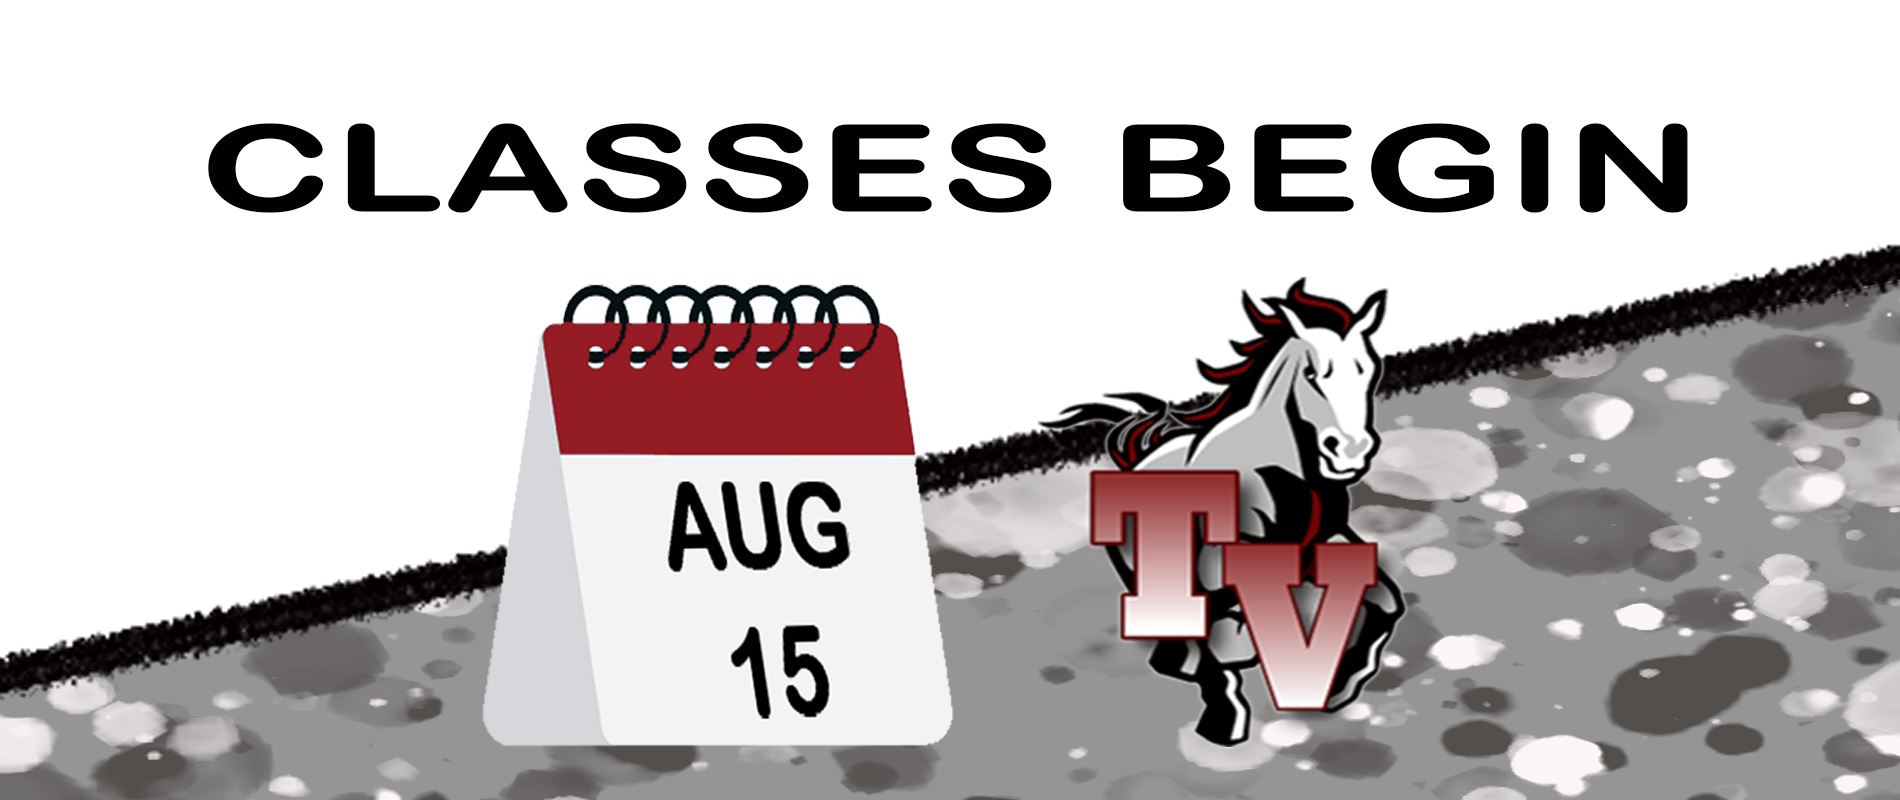 Classes Begin August 10th with calendar icon and TV logo.